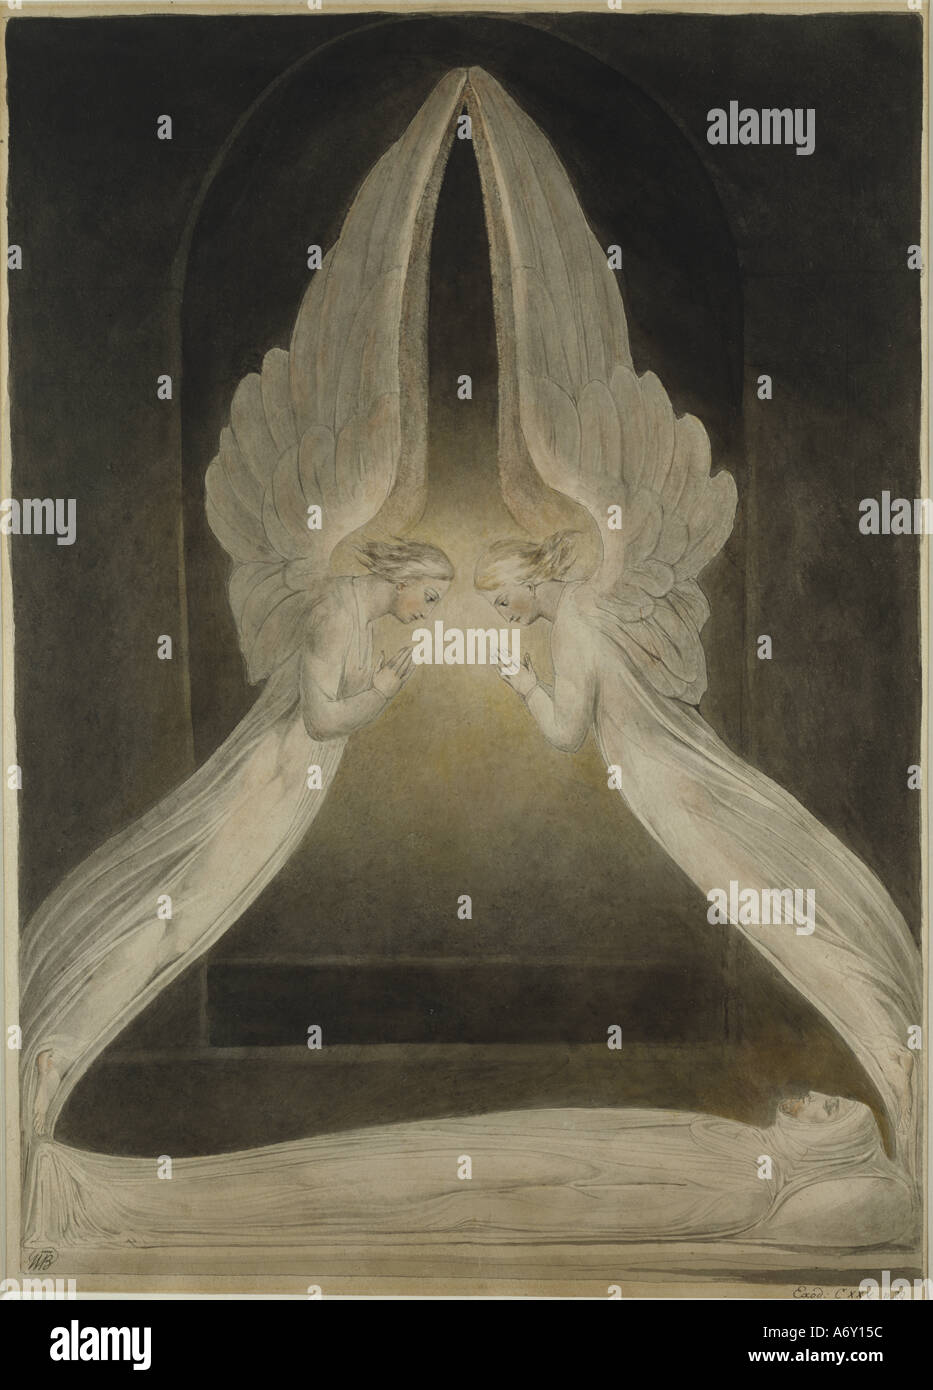 The Angels Hovering over The Body of Christ in the Sepulchre by William Blake. England, late 18th century. Stock Photo